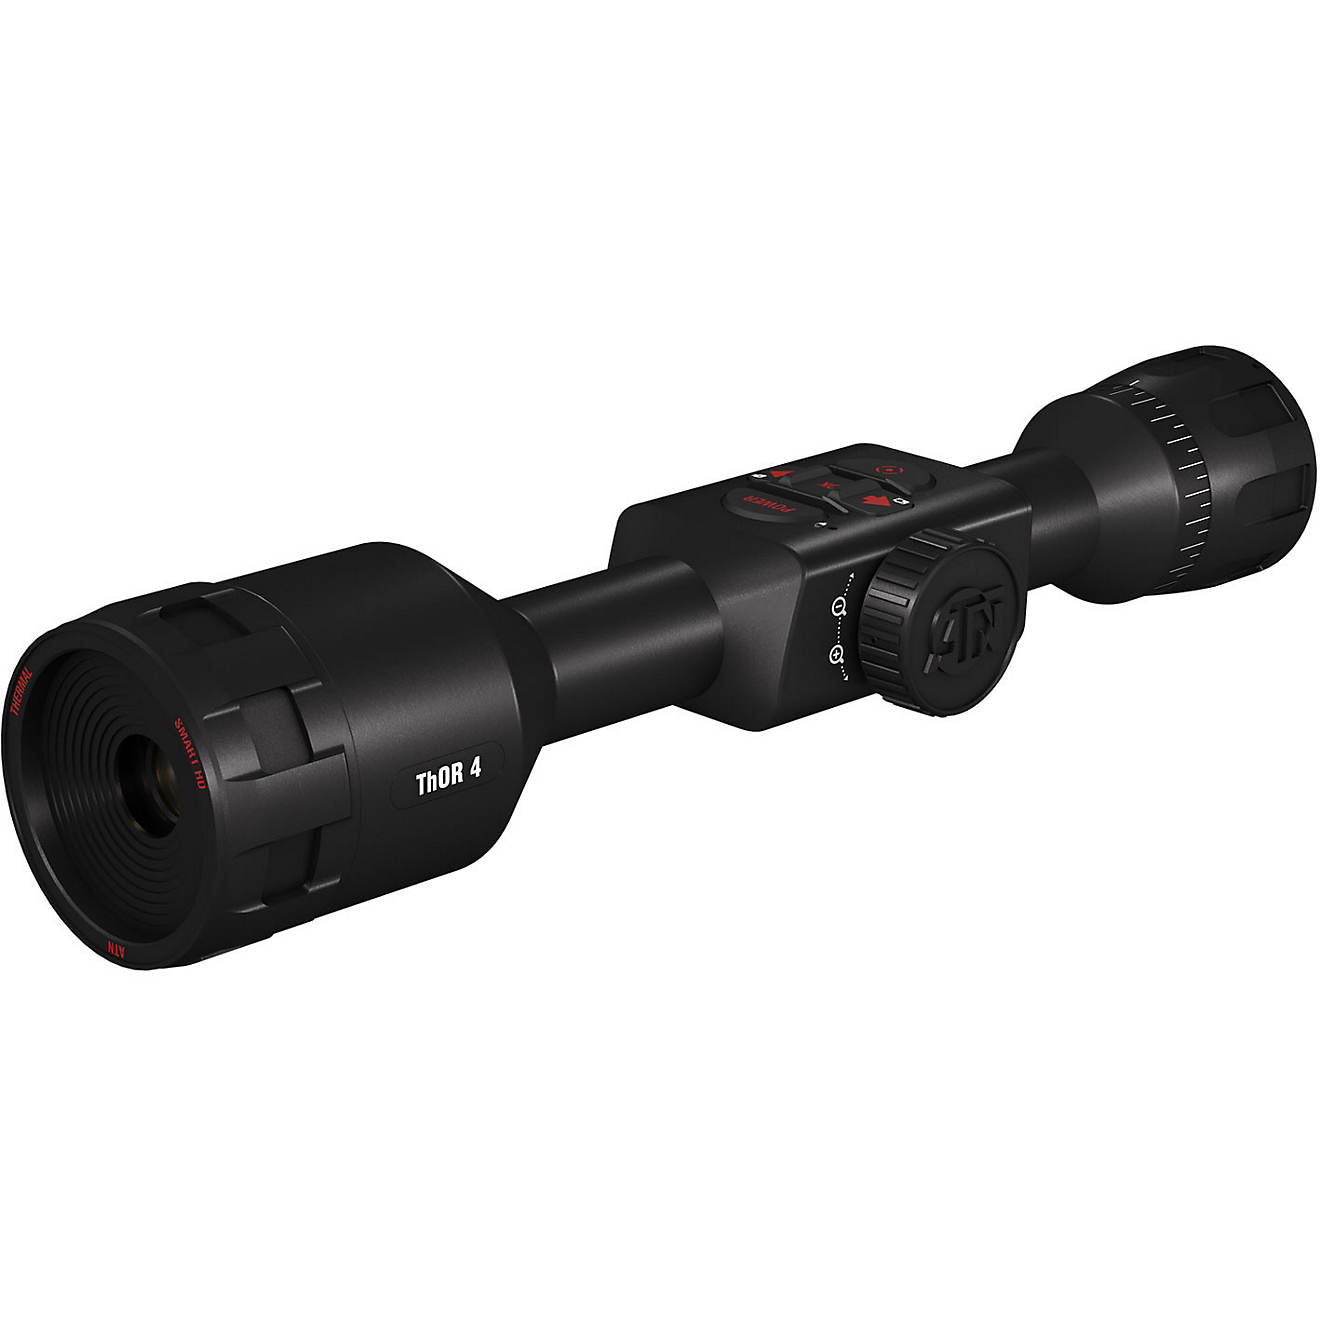 ATN Thor 4 640 HD 1.5 - 15 x 19 Thermal Riflescope                                                                               - view number 1